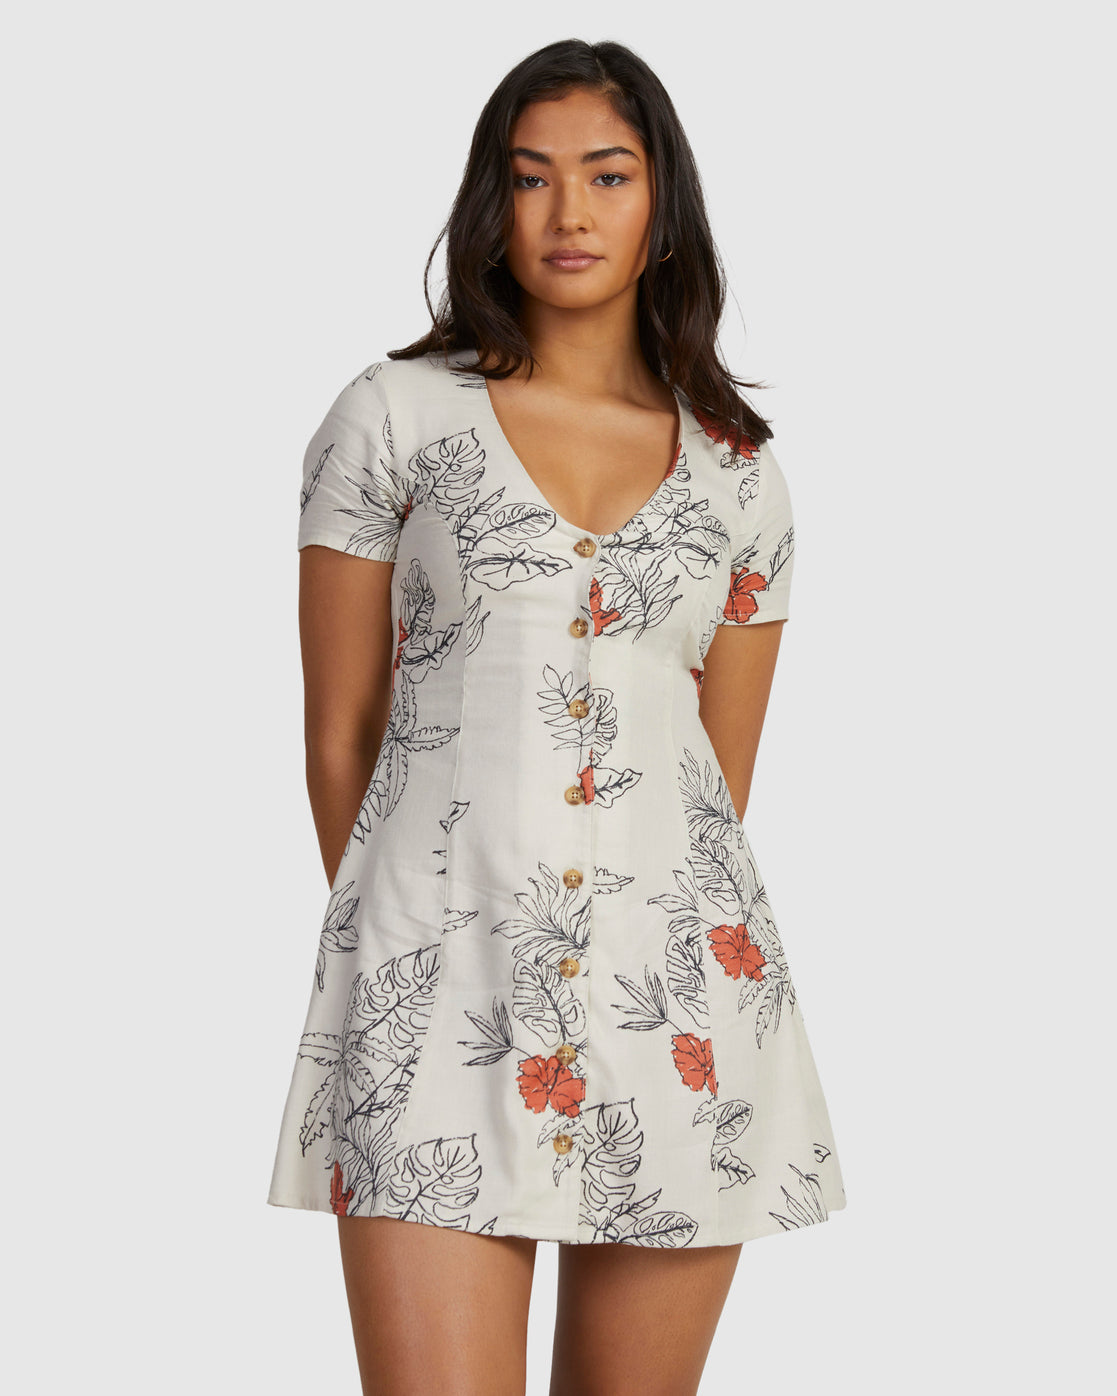 RVCA Tropicalsy Understated Women's Dress Bleached 